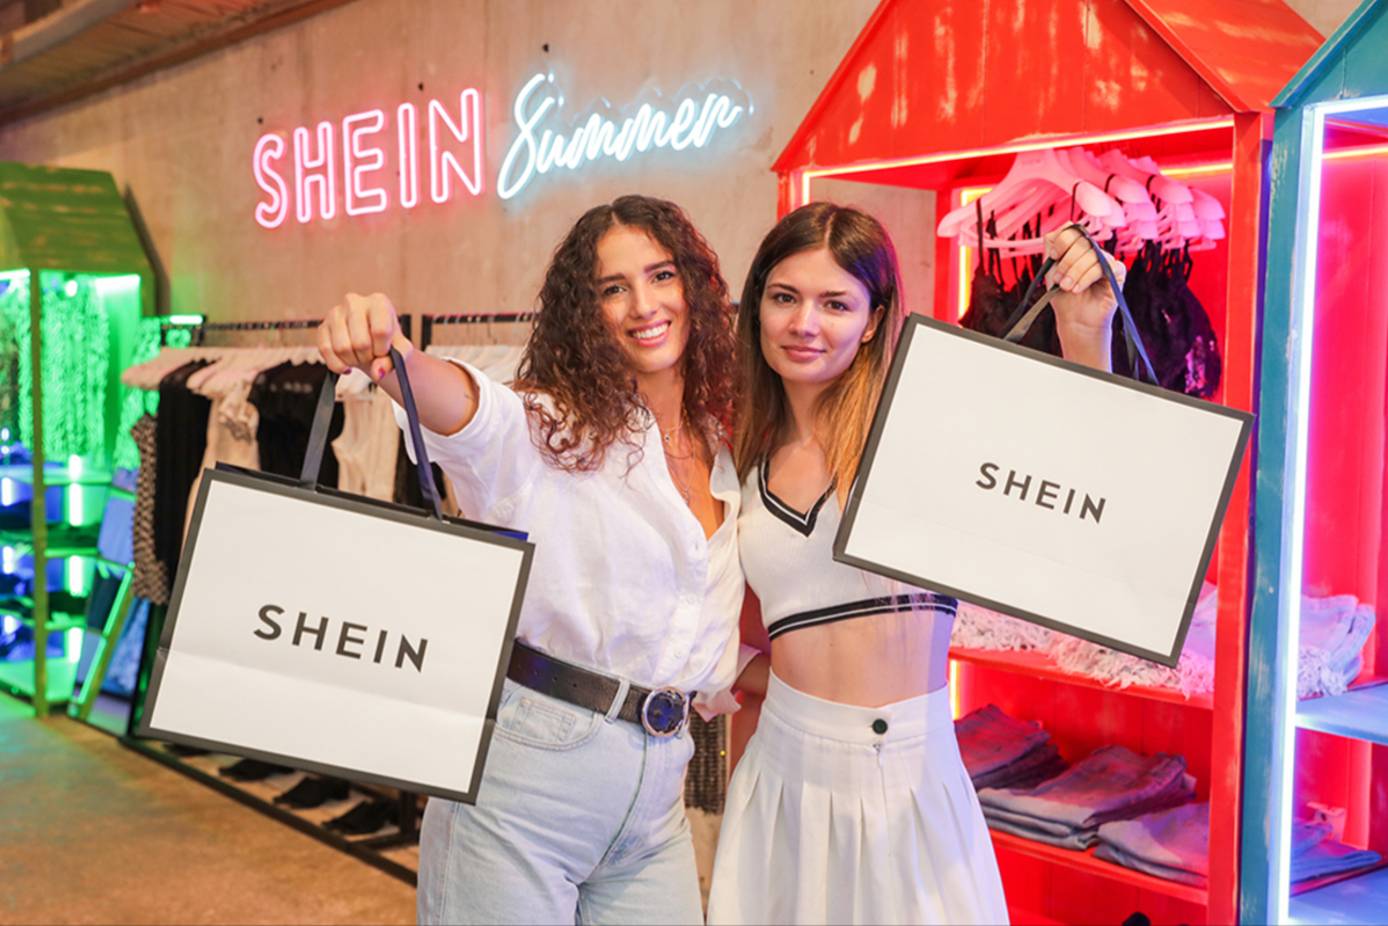 Shein, the ultra-fast fashion giant, considers becoming an online